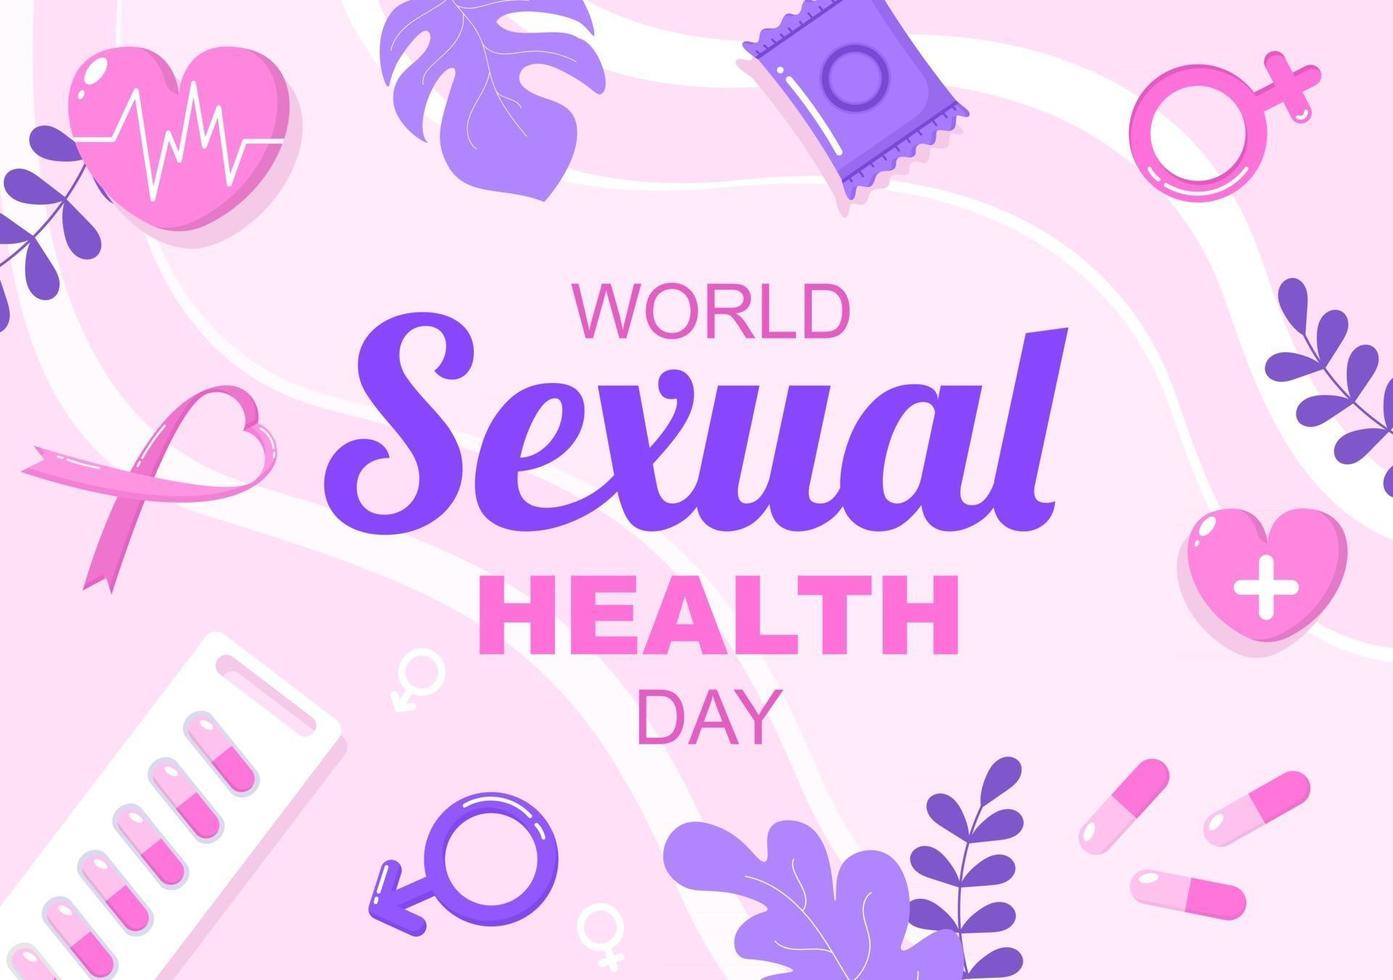 World Sexual Day Background Illustration vector